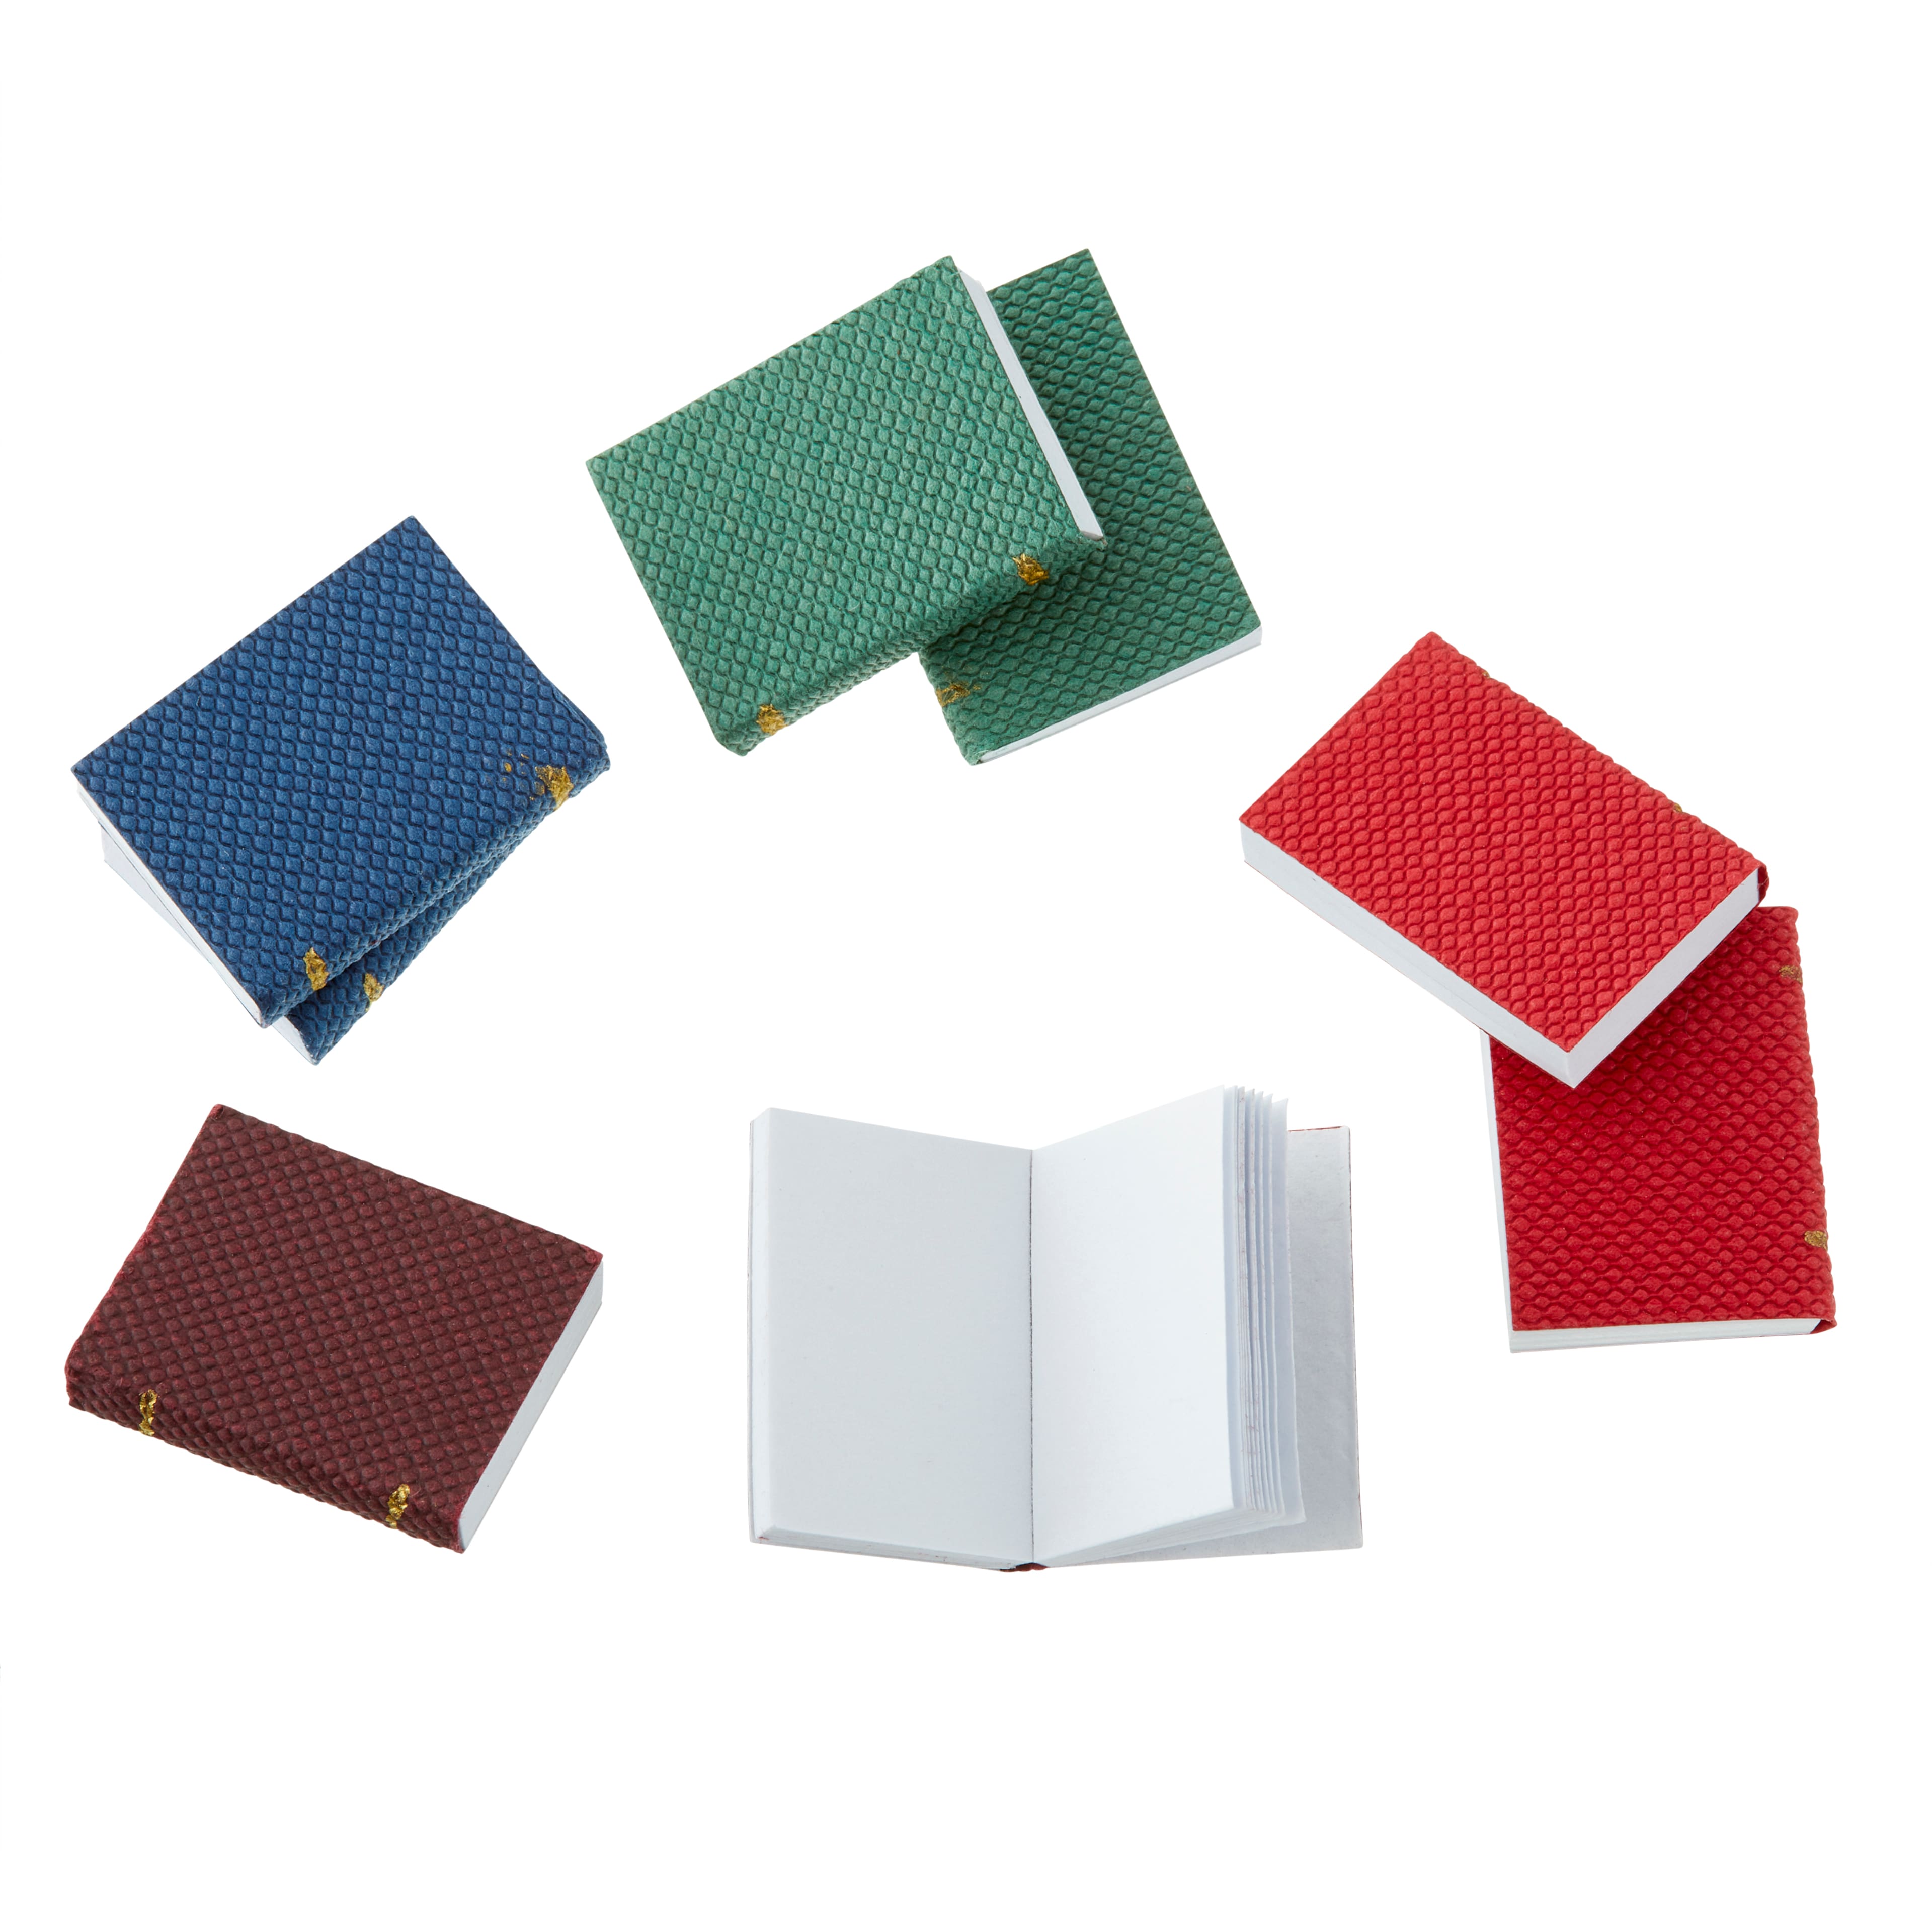 12 Packs: 8 ct. (96 total) Mini Covered Books by Make Market&#xAE;